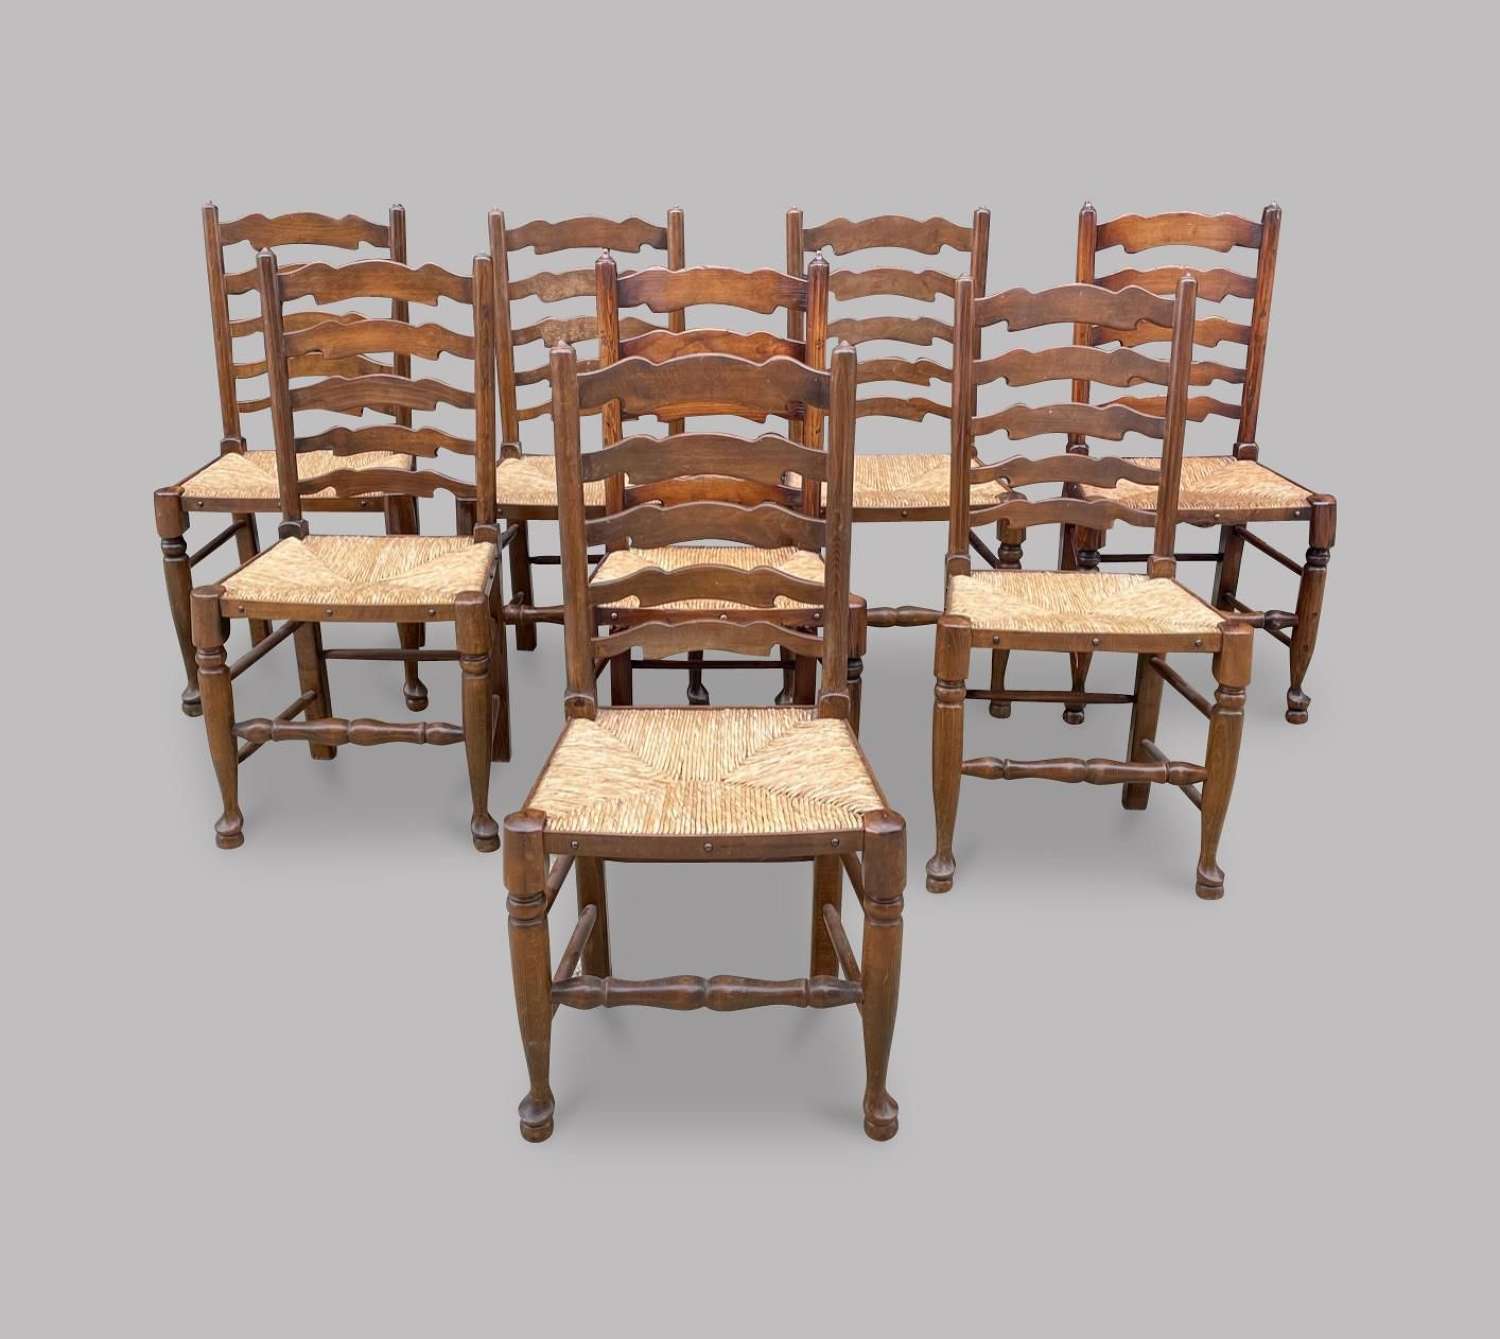 A Set of Eight Ladderback Chairs